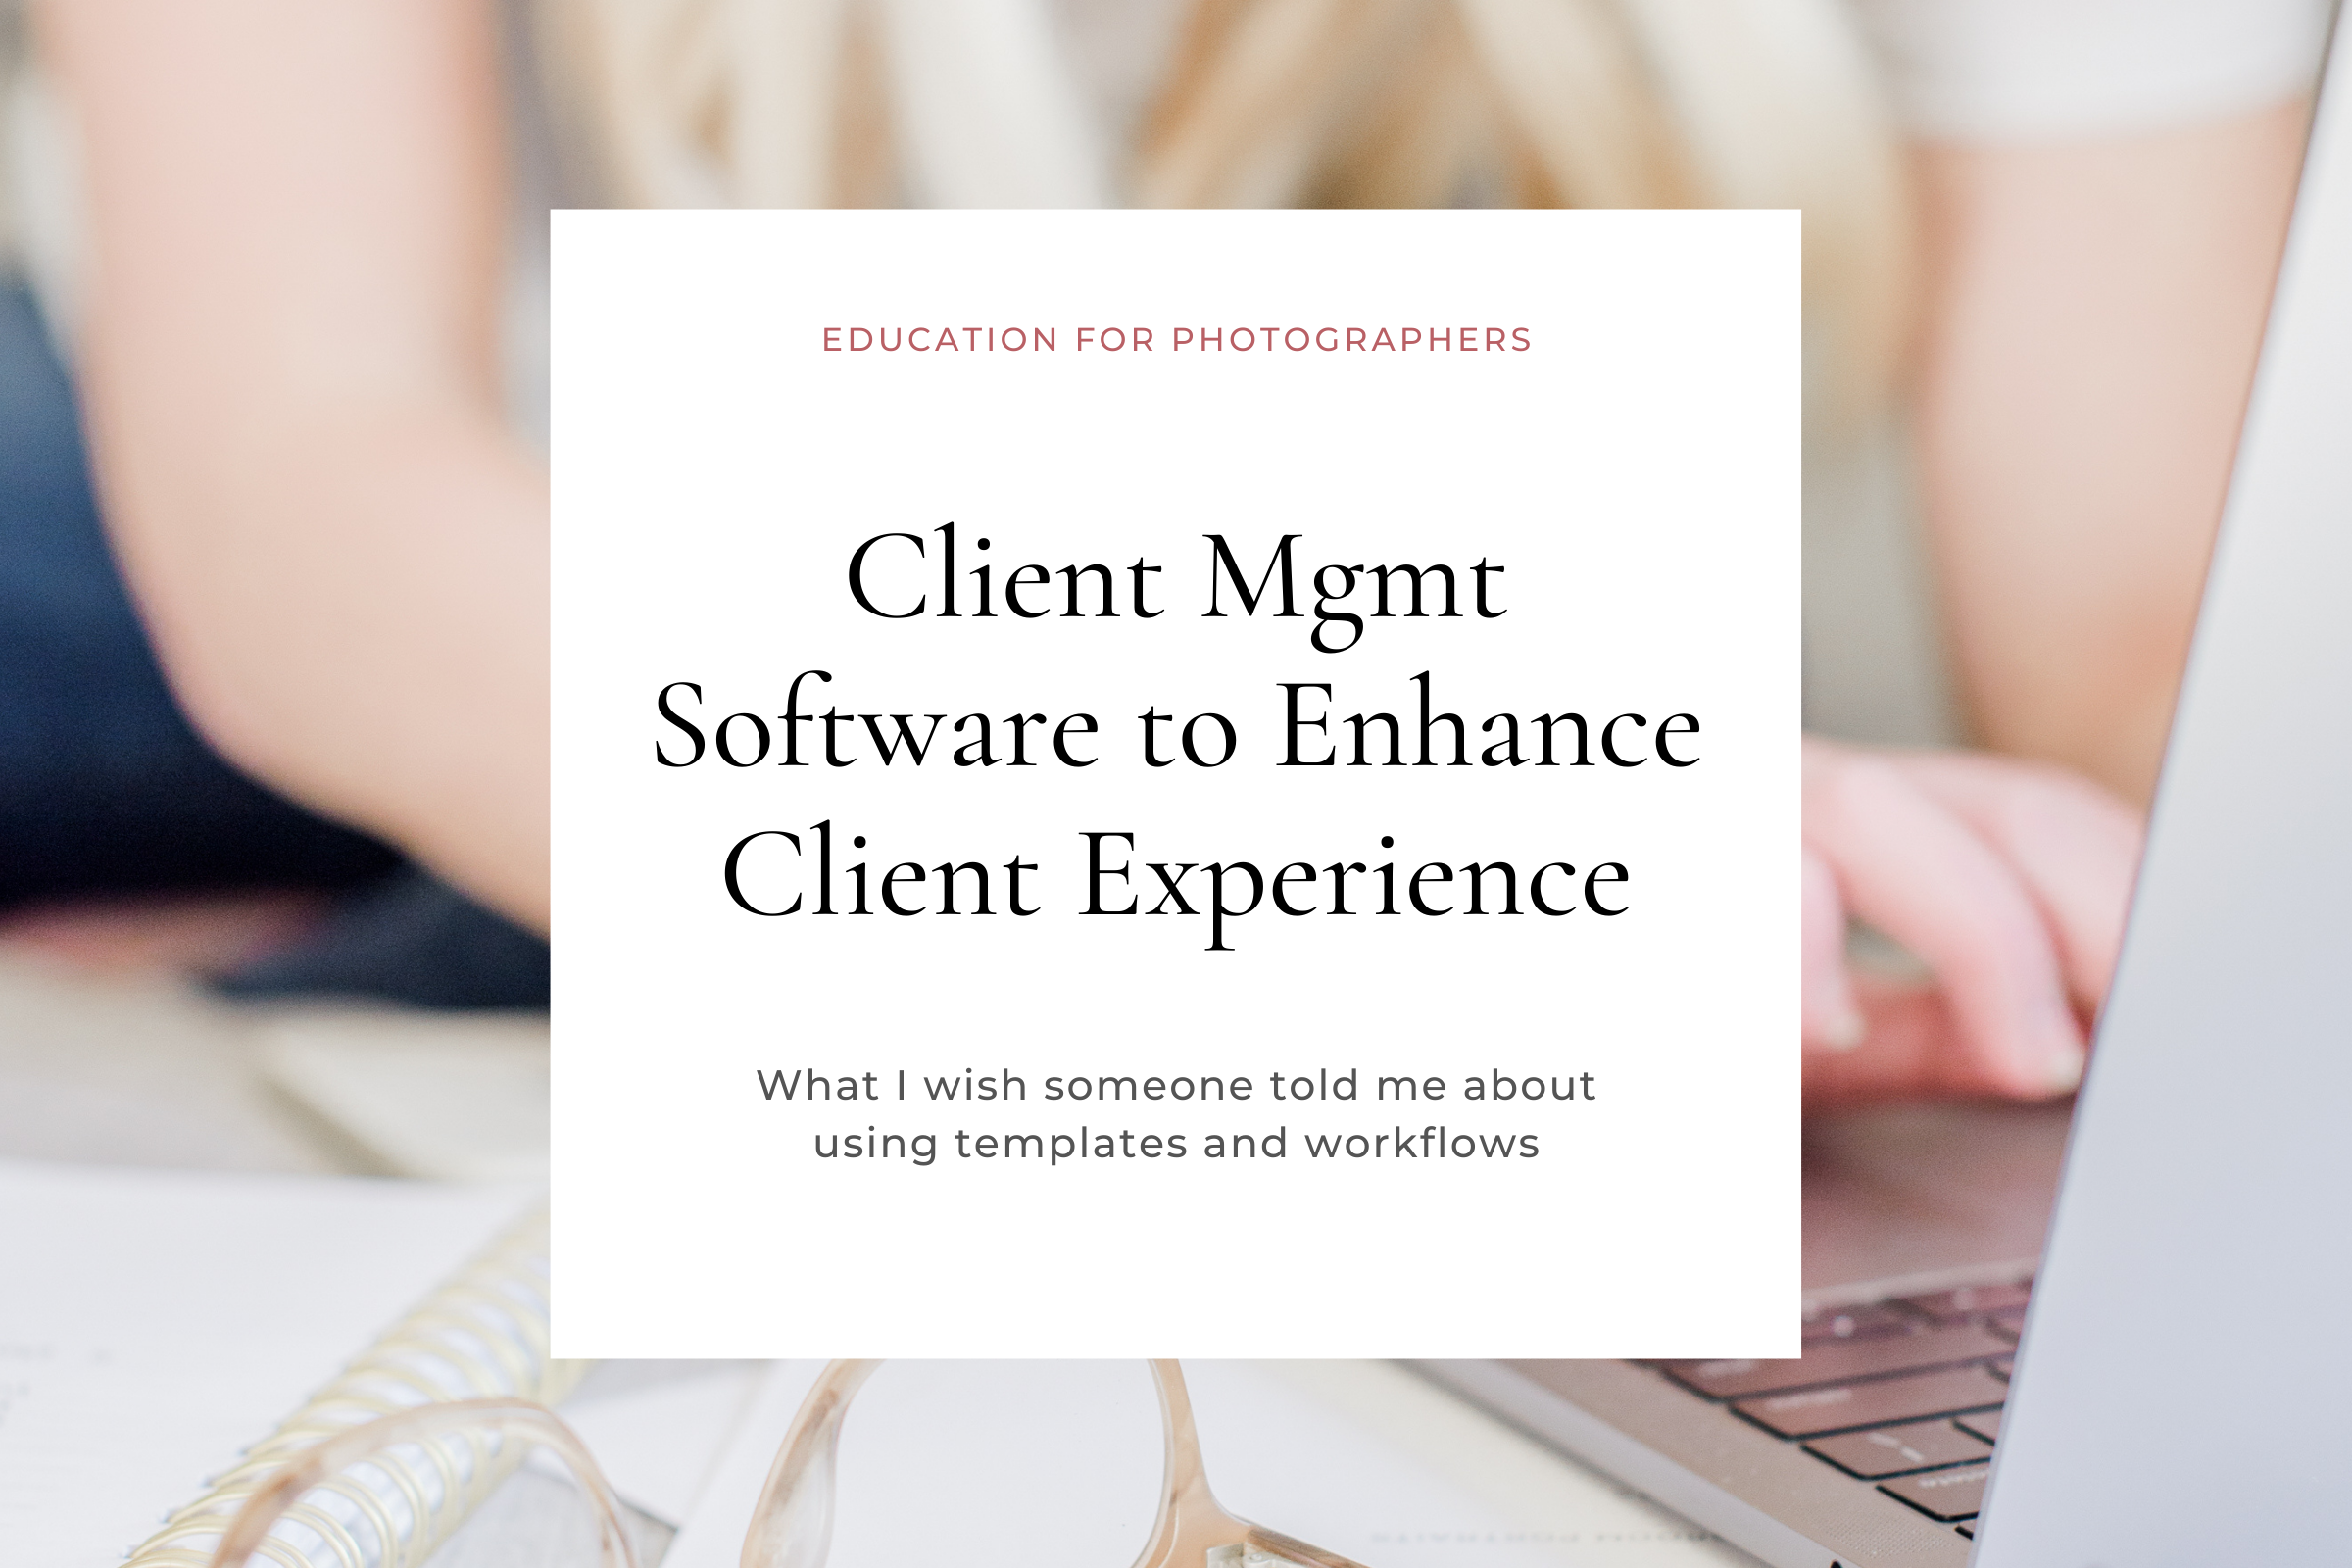 Honeybook to Enhance Client Experience | Photographer Education, Client Experience and Workflows, Marketing Education for Wedding Photographers